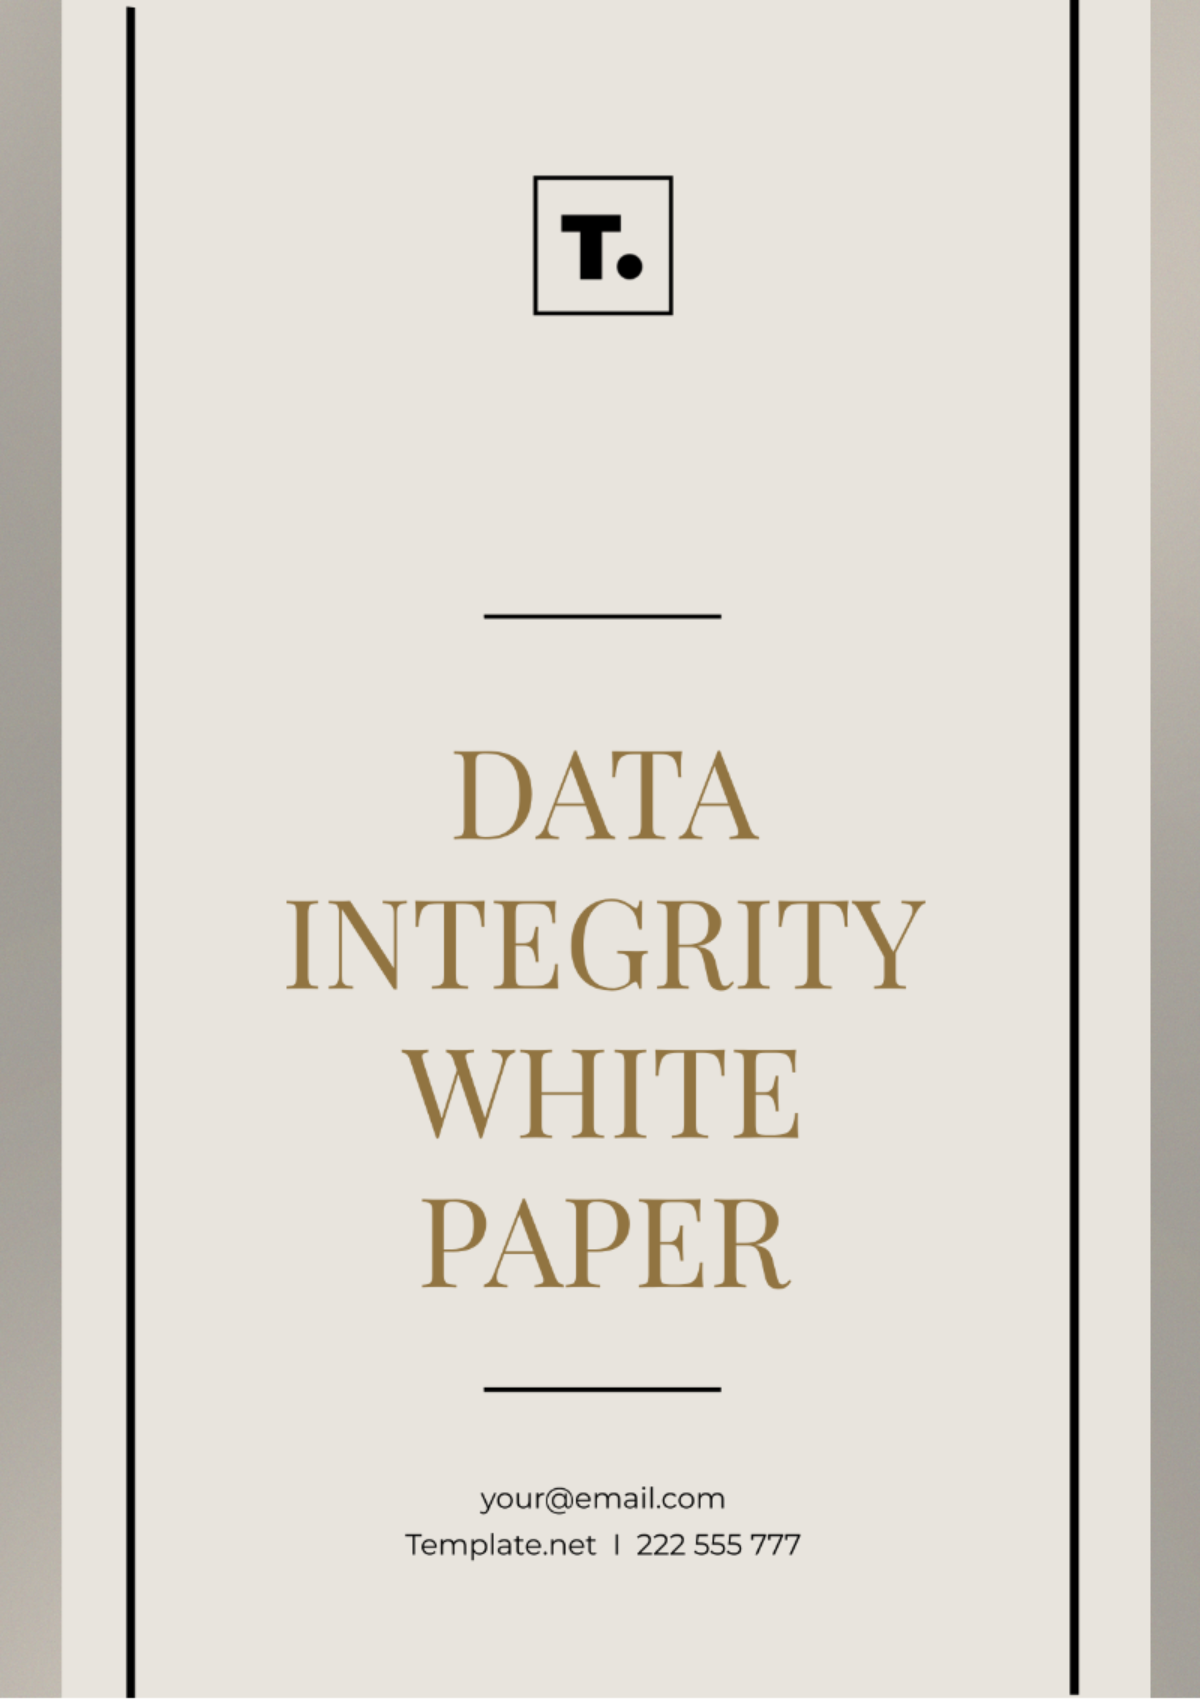 Data Integrity White Paper Template